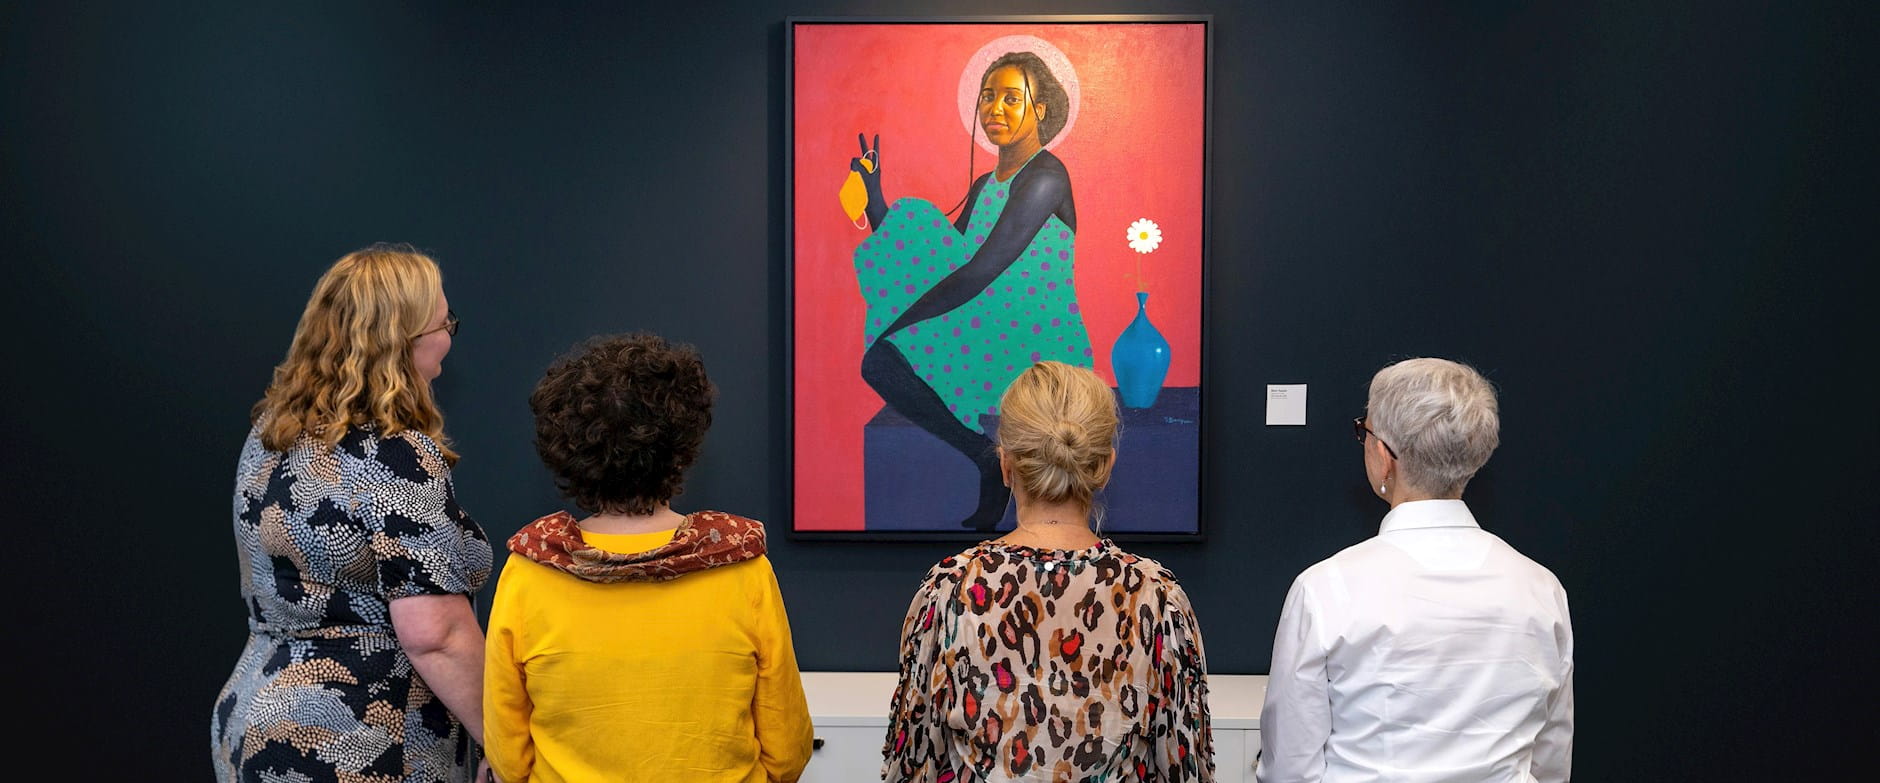 Four women look at a painting of a woman with a halo holding an orange face mask at the London Conference Centre